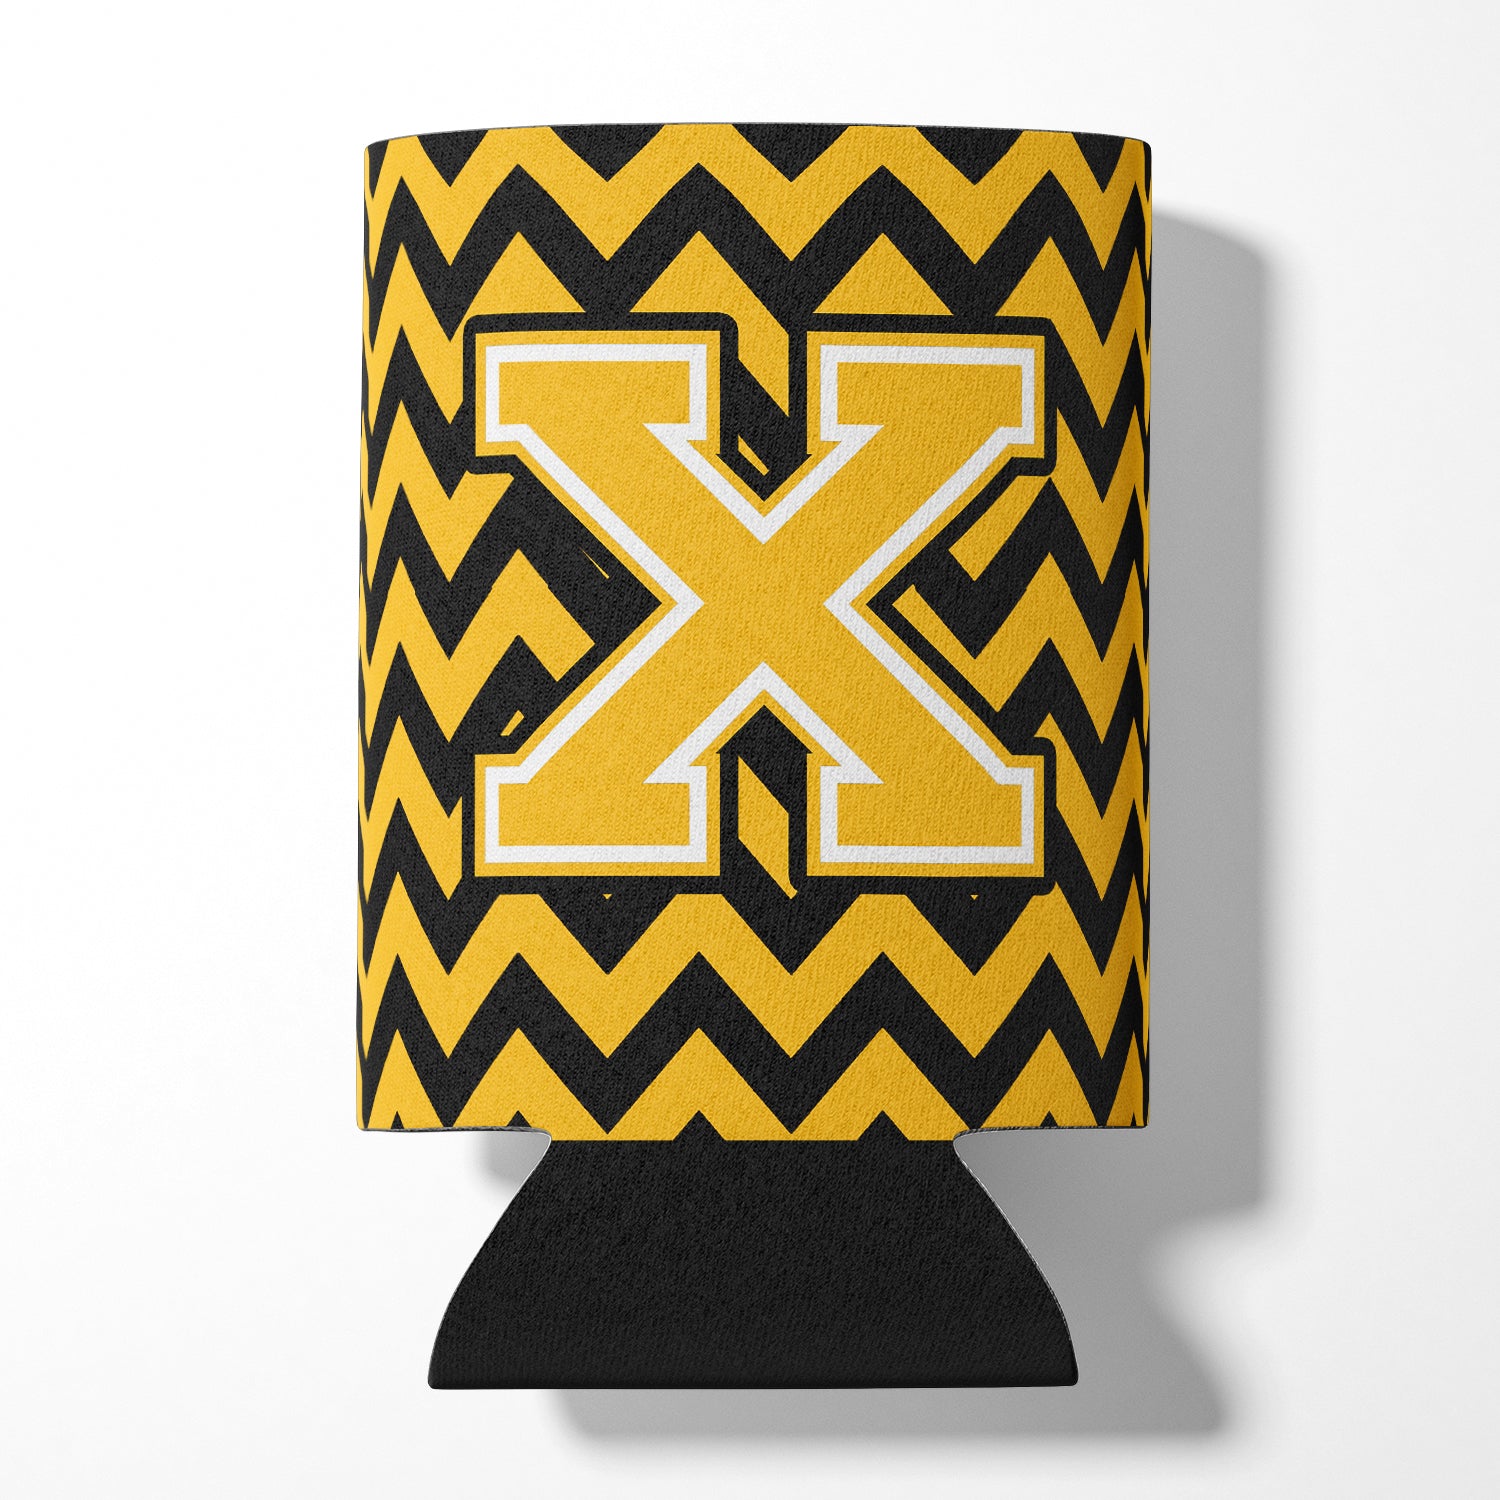 Letter X Chevron Black and Gold Can or Bottle Hugger CJ1053-XCC